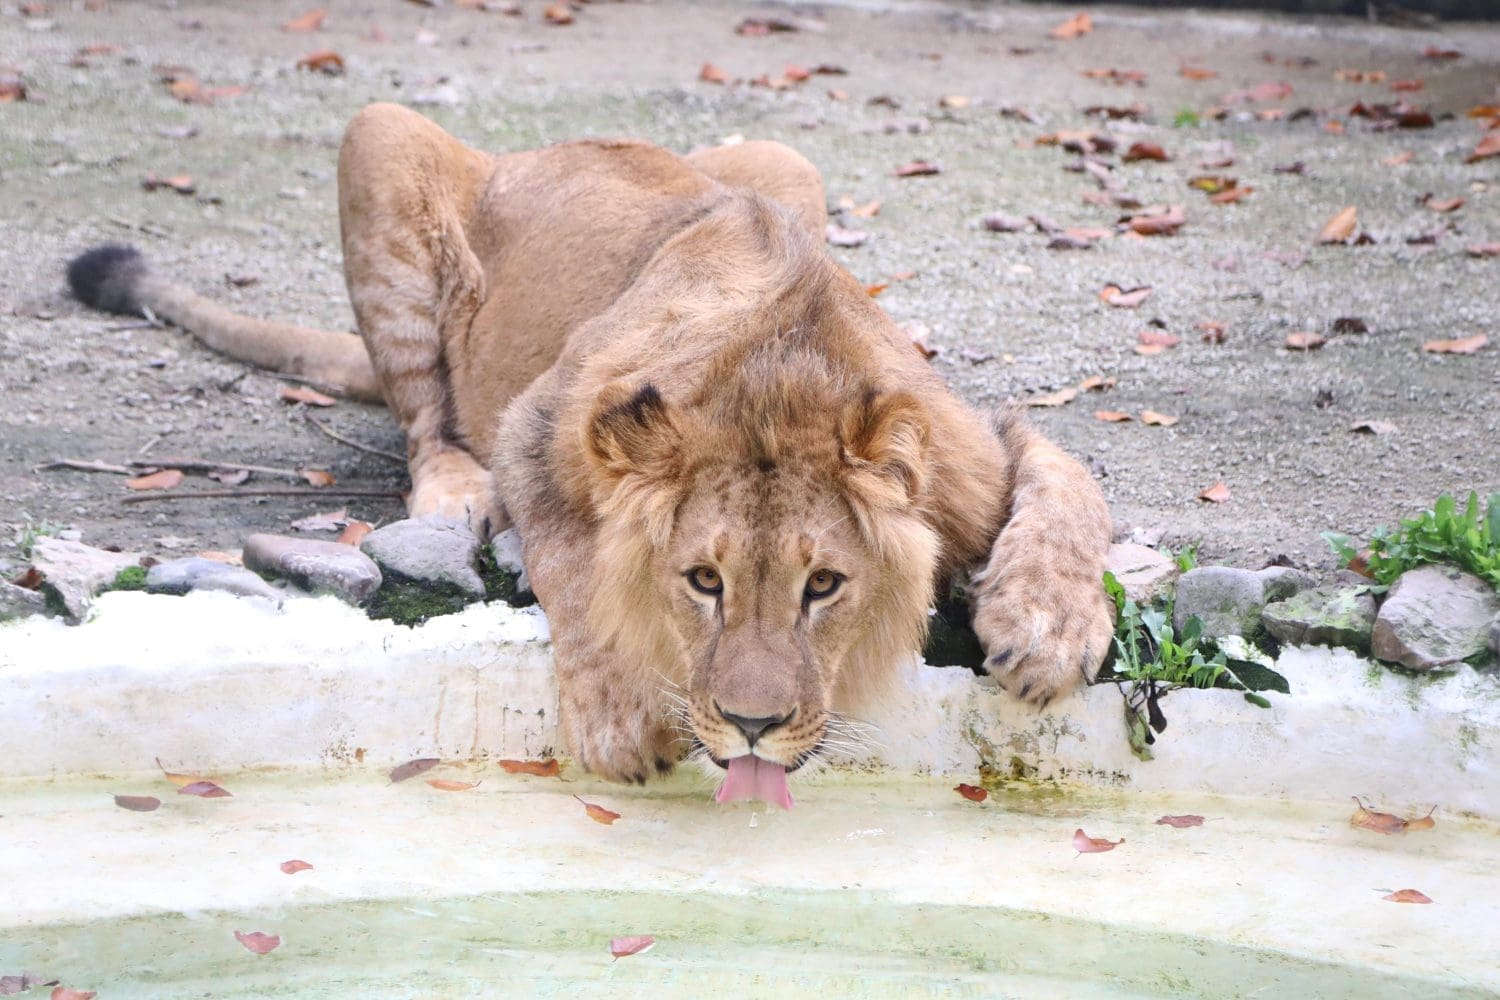 Tsar drinking from the pool at Natuurhulpcentrum Lion